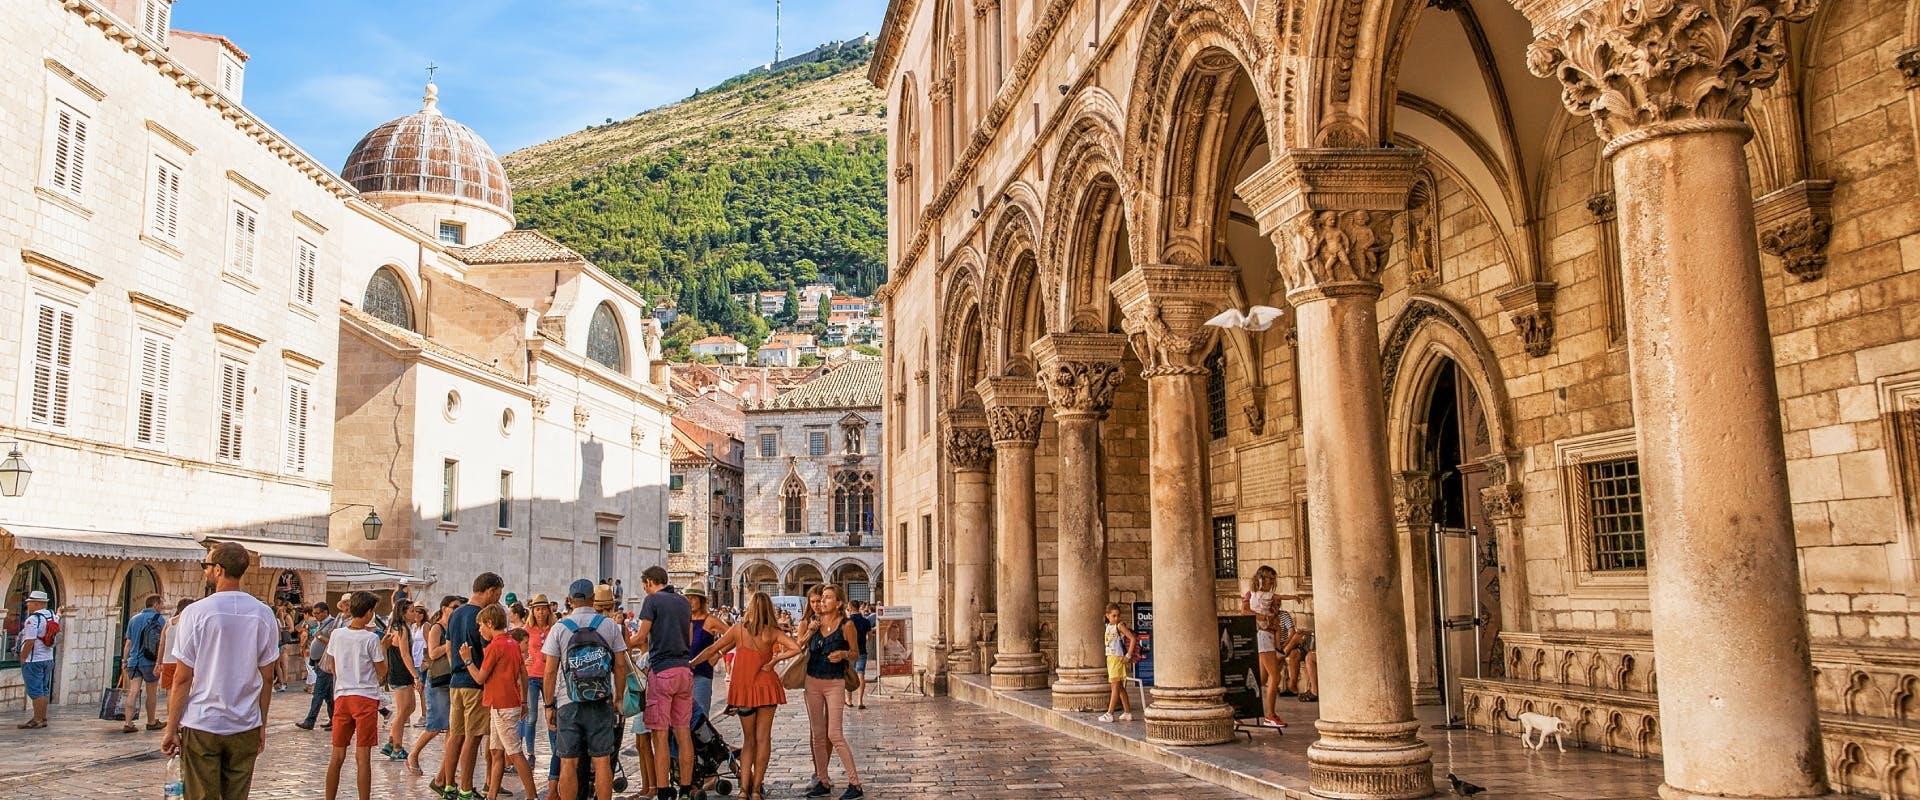 tourists in the centre of Dubrovnik